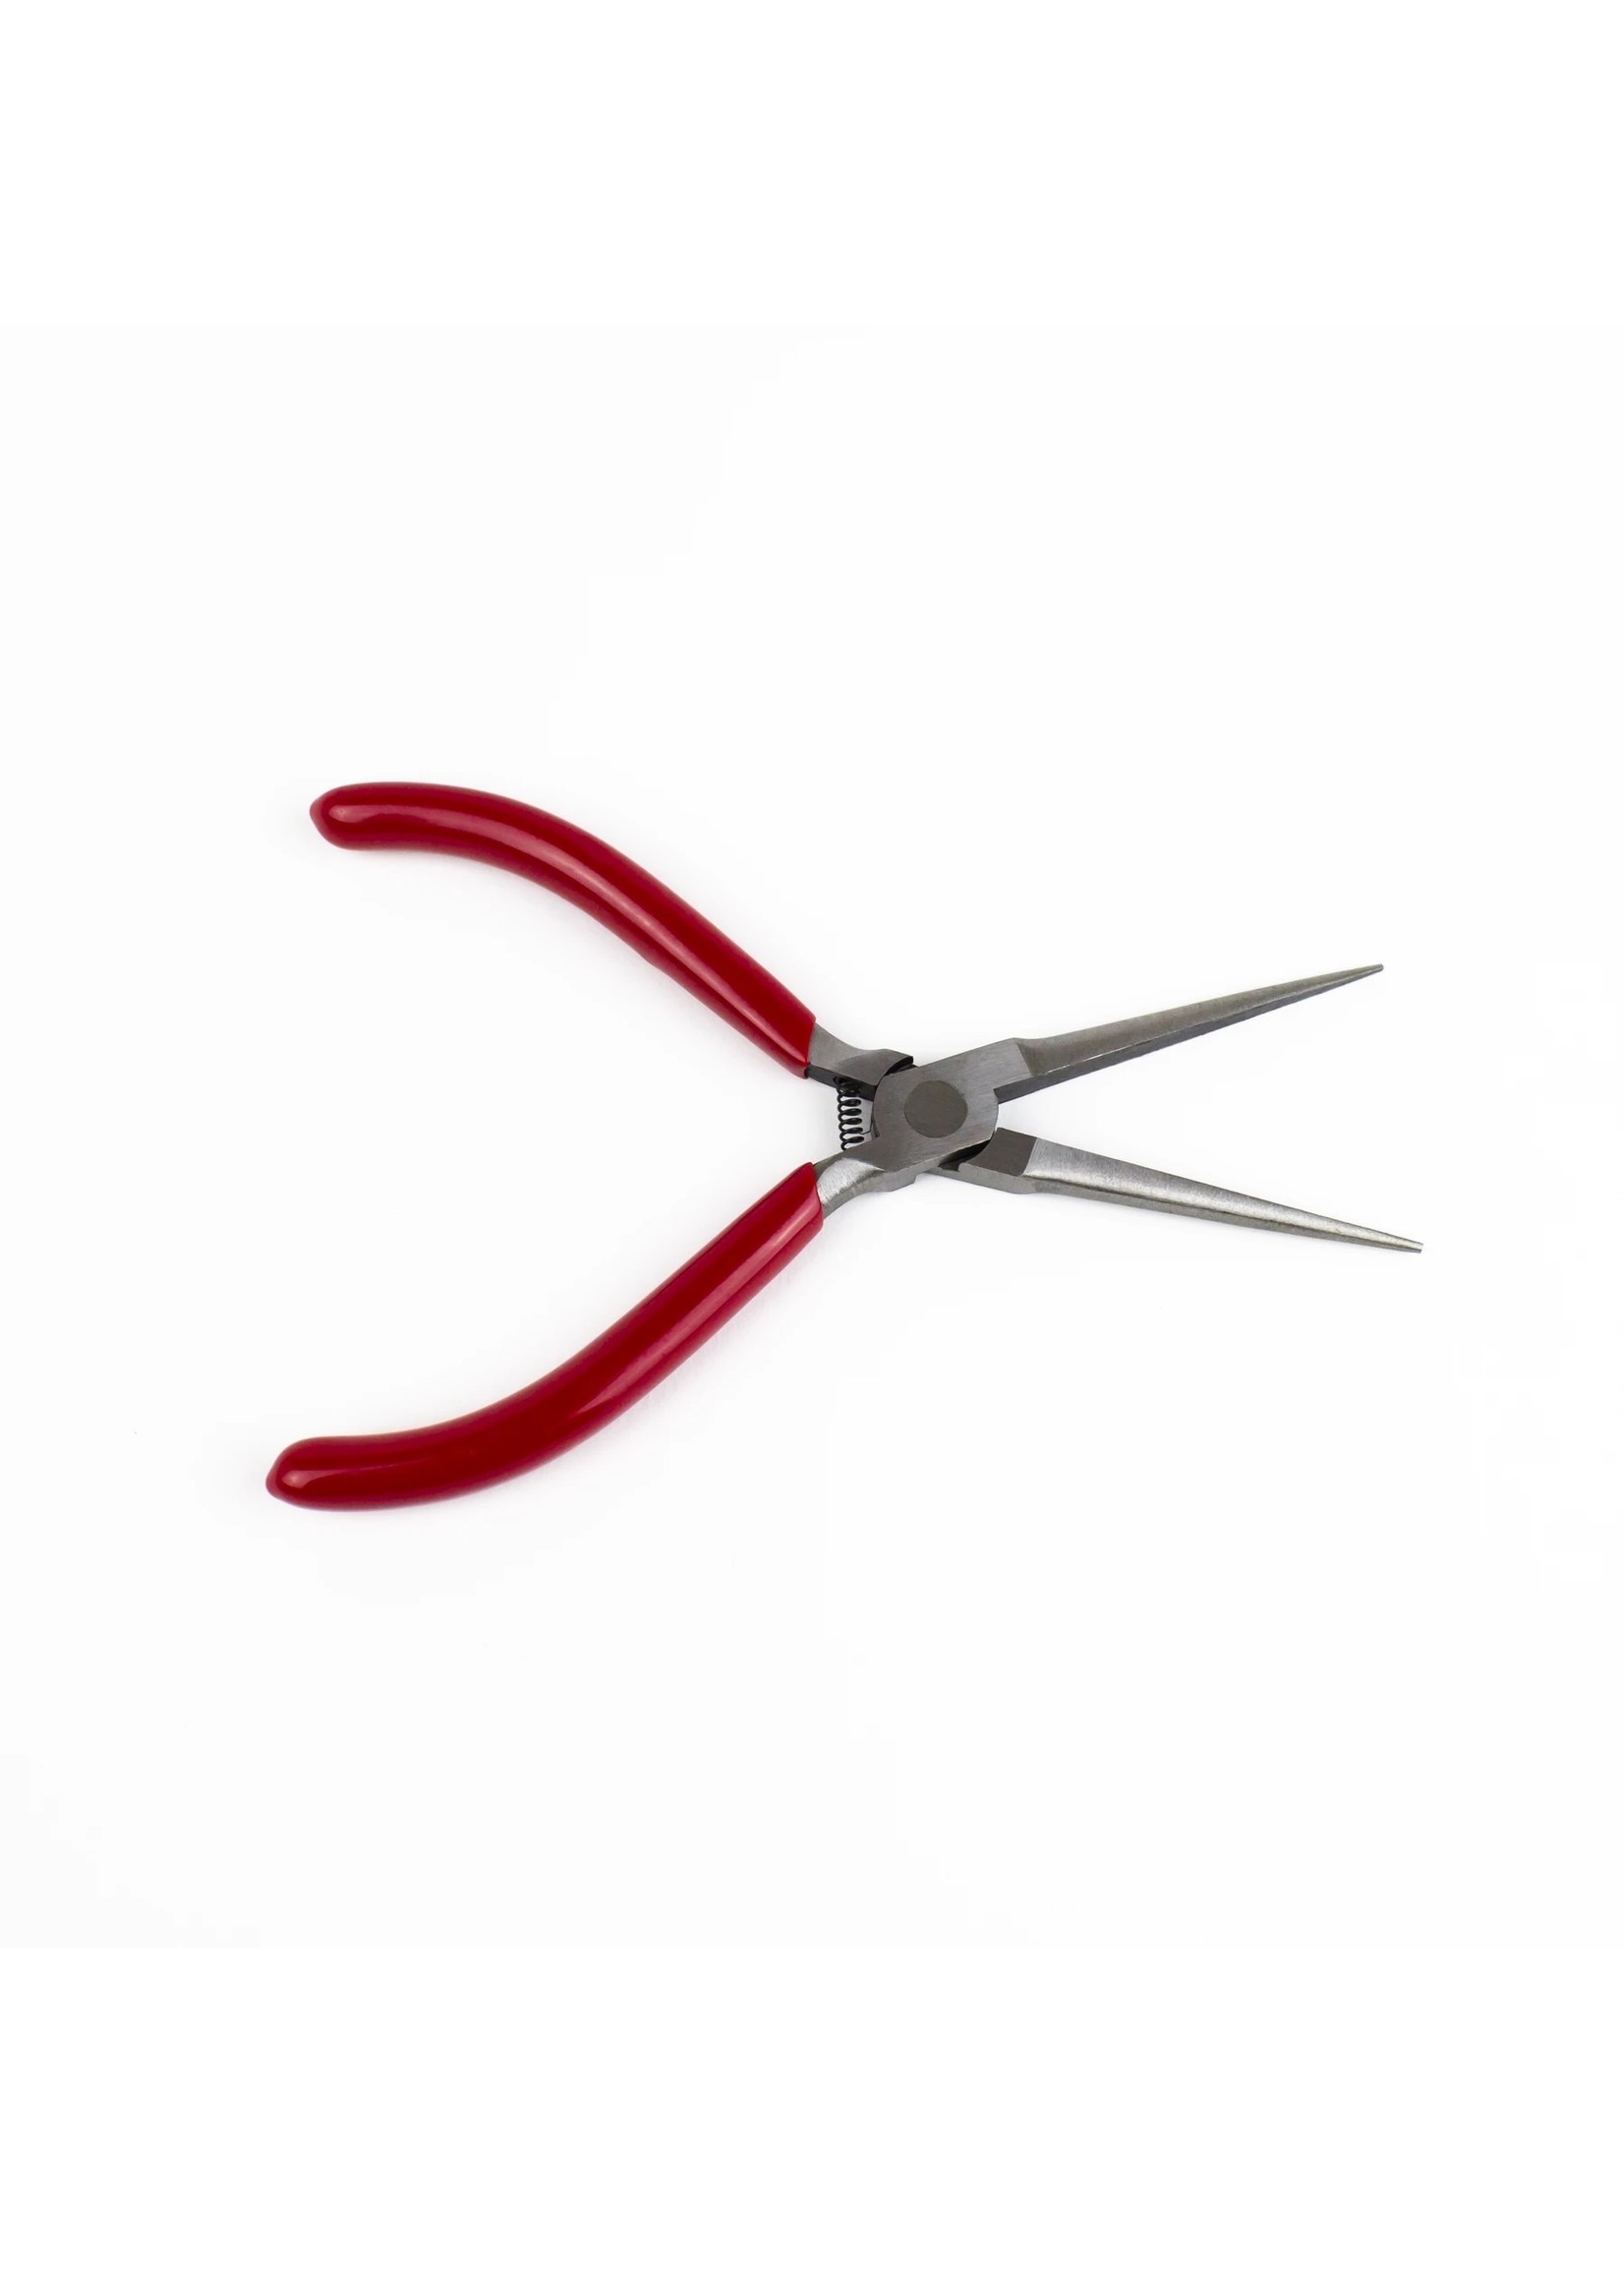 Excel 55561 - Long Needle Nose Pliers - Hub Hobby